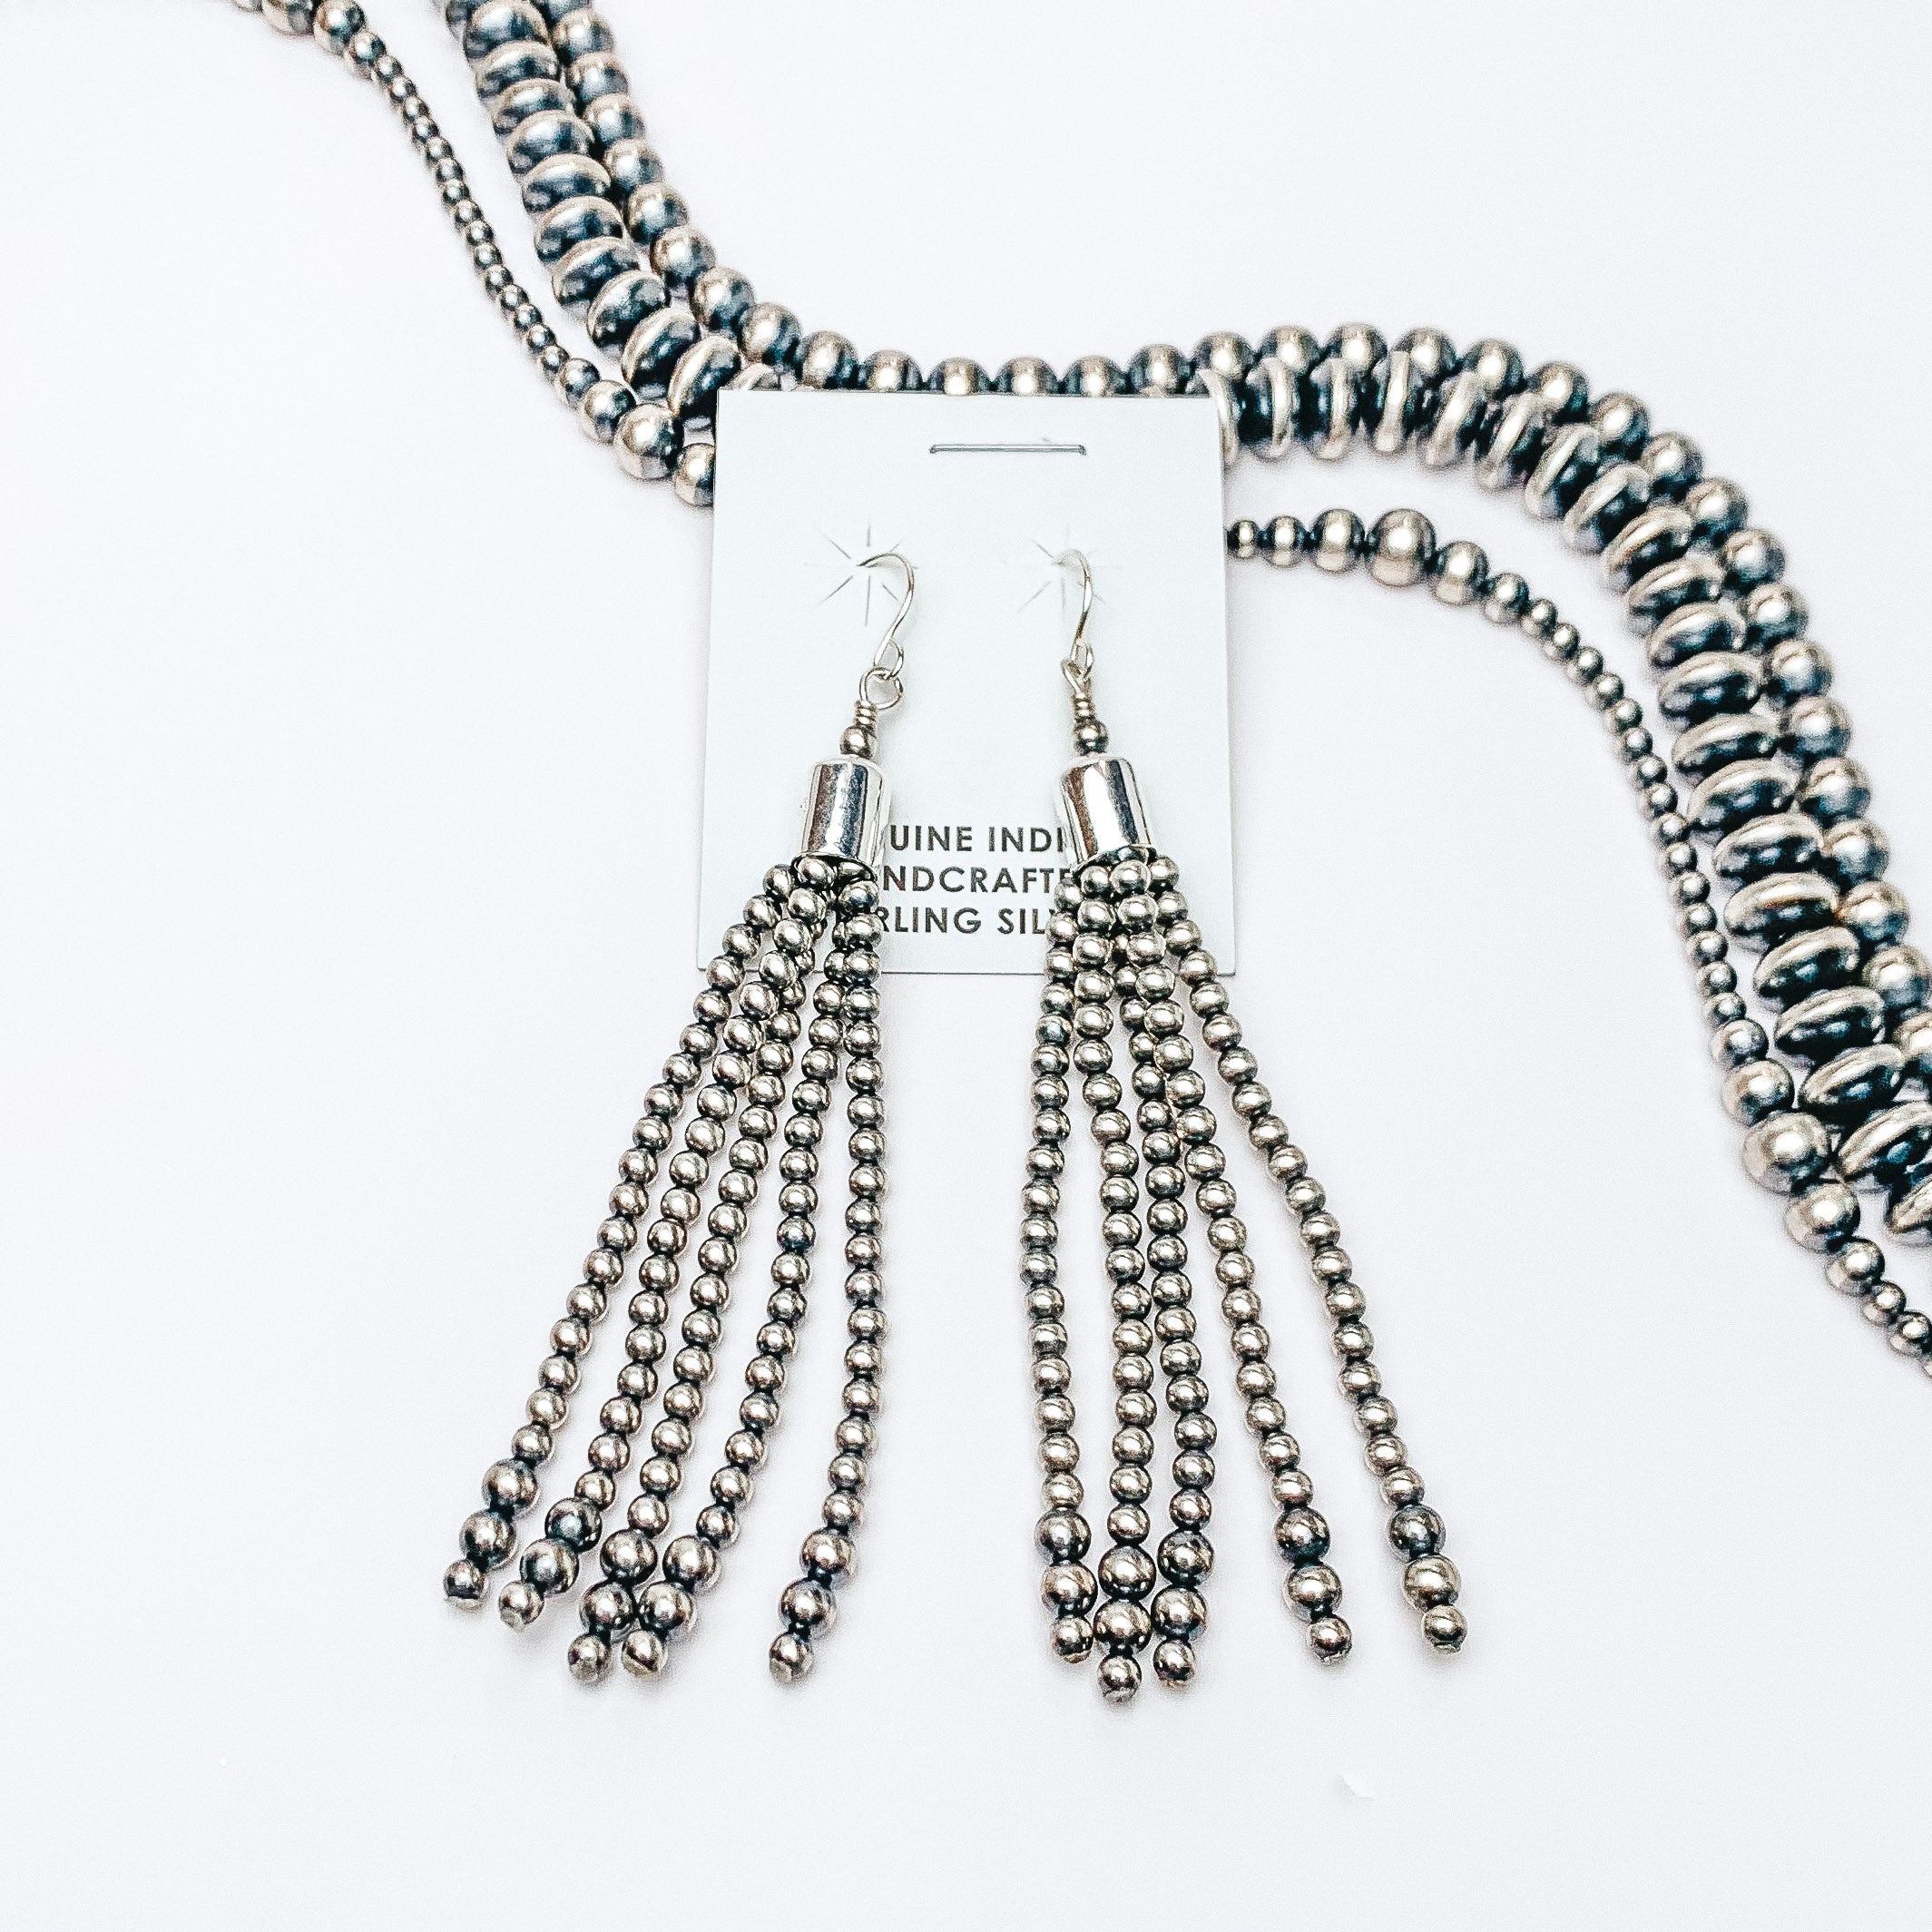 Centered in the picture is navajo pearls tassel earrings. Navajo pearls are laid above the earrings, all on a white background. 